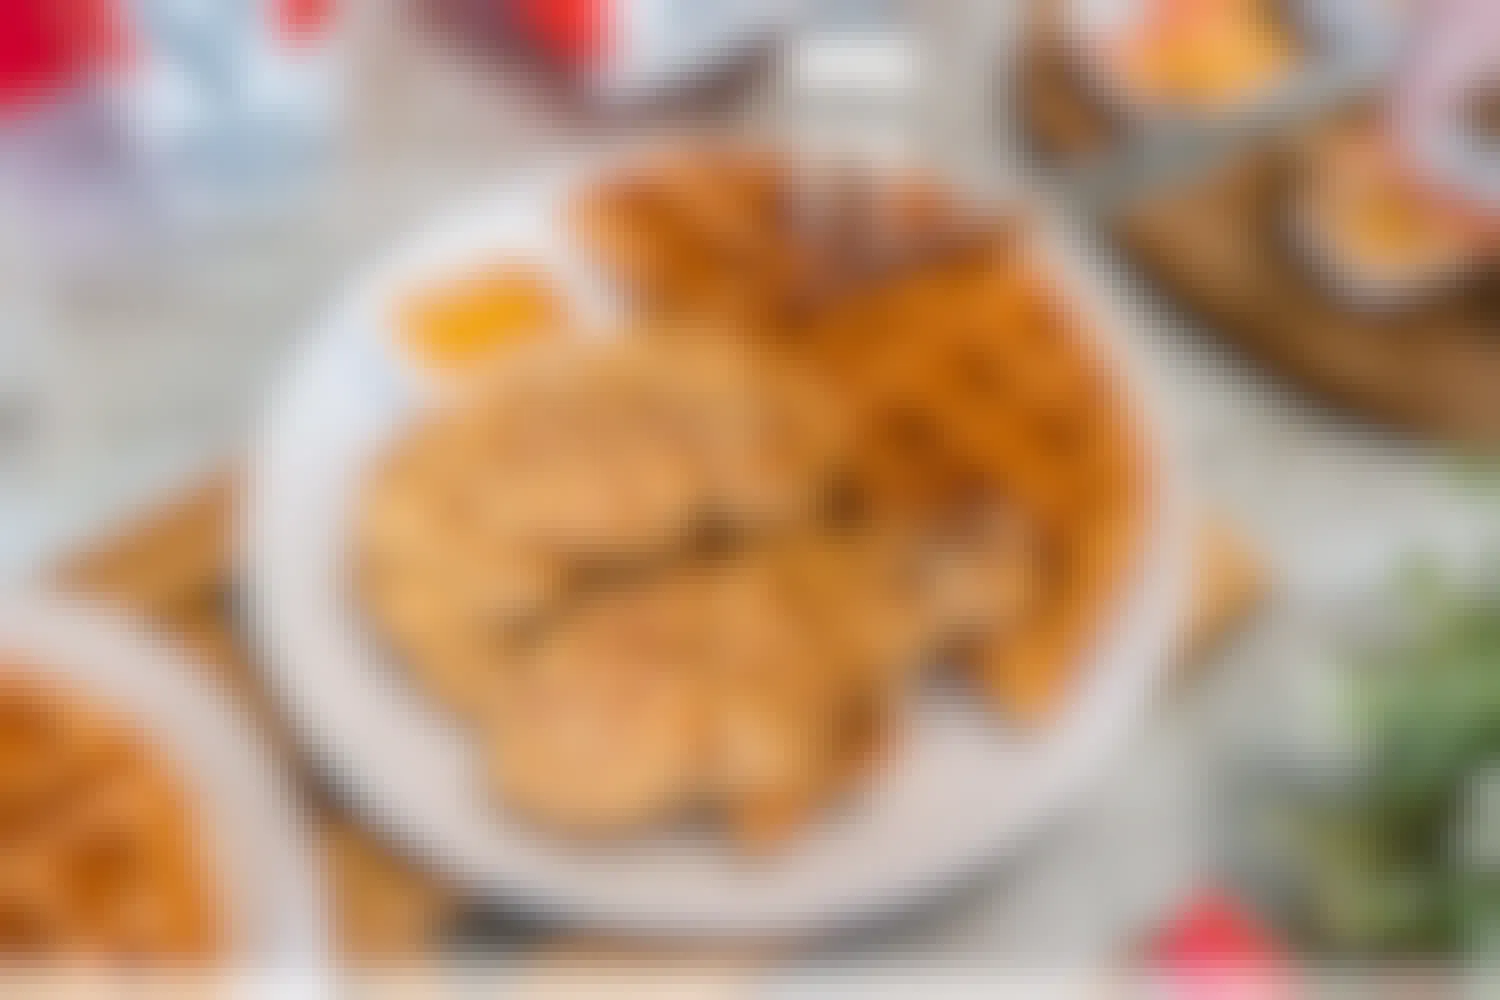 A plate of Chicken and waffles with KFC cup, and food container in the background.